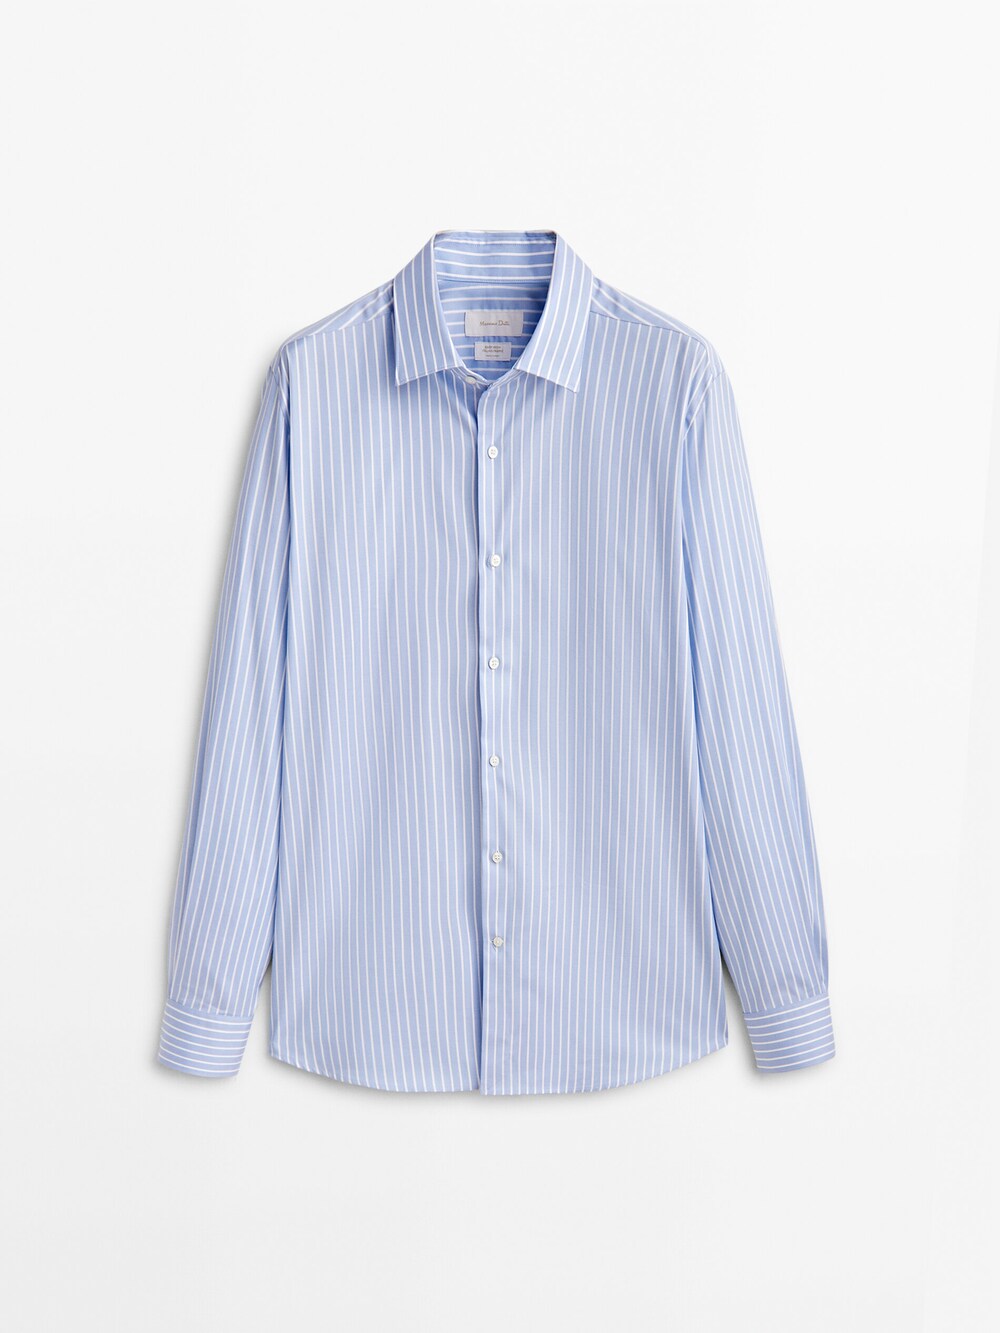 PINPOINT STRIPED SHIRT